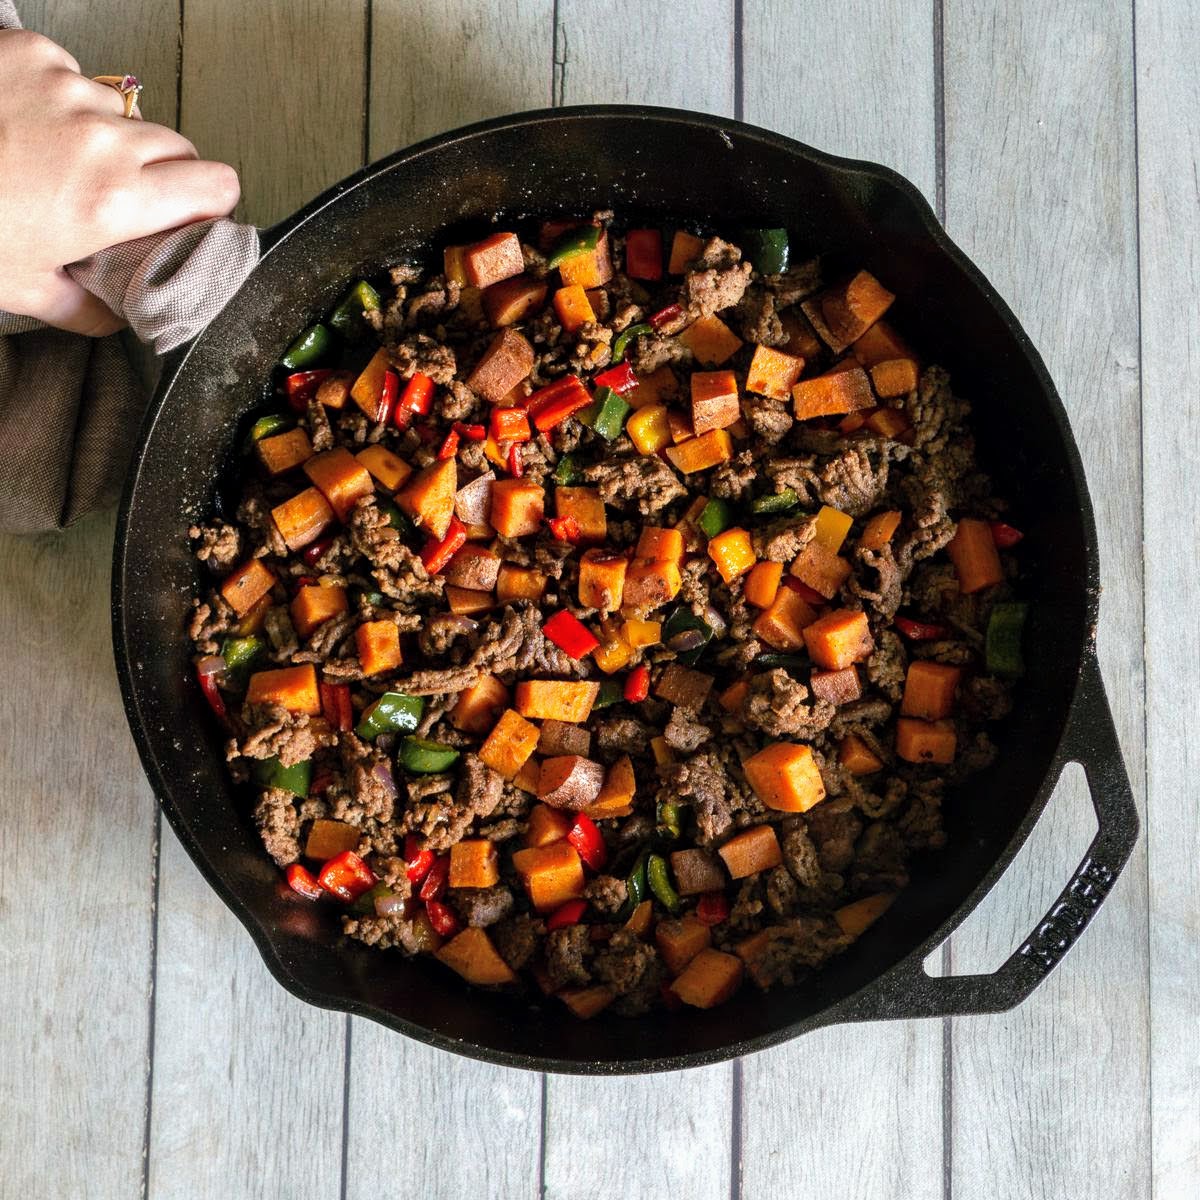 Ground beef, sweet potatoes, peppers, in a cast iron skillet.